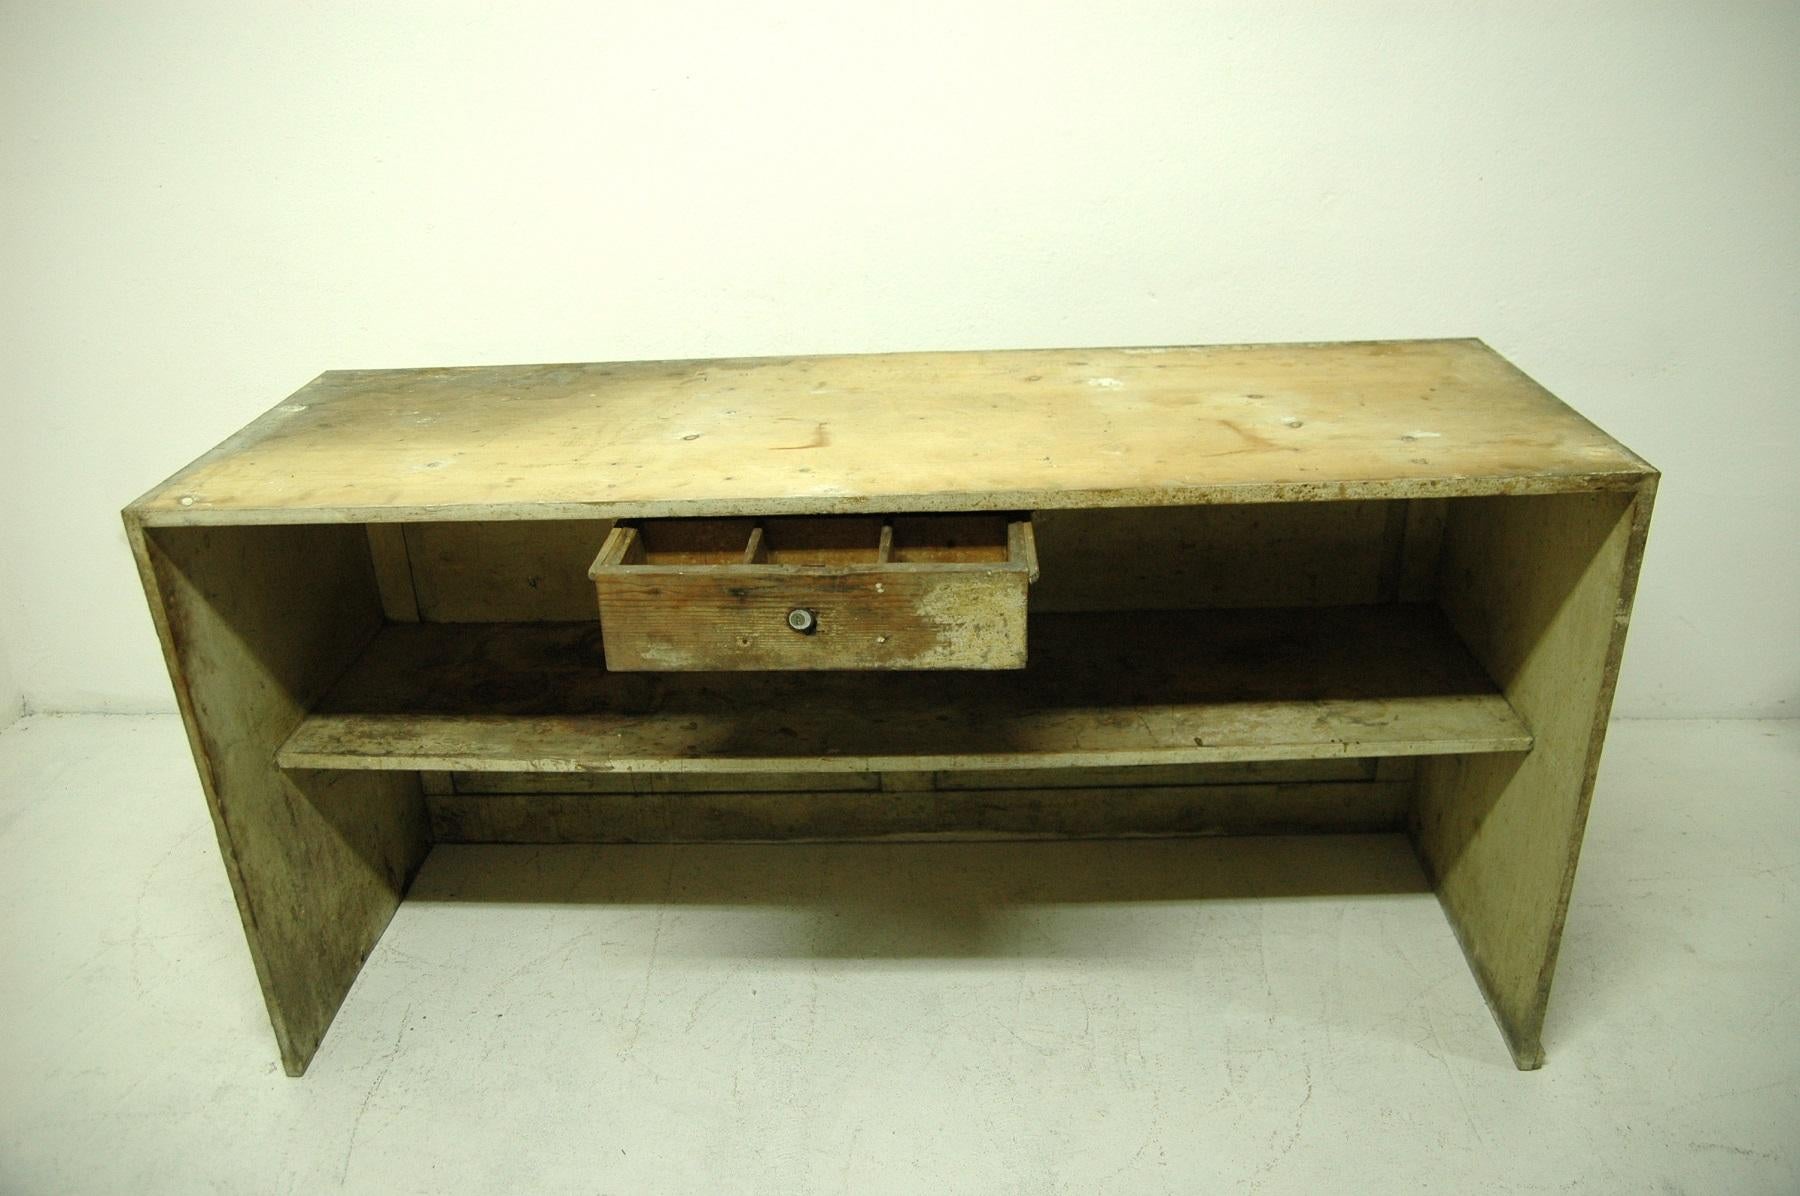 Antique sales counter from the 1920s. This table was made of spruce or pine wood. It was used as a sales counter in a grocery store in Bohemia. Structurally very well preserved, the surface bears a natural patina due to age and use.

Measures: